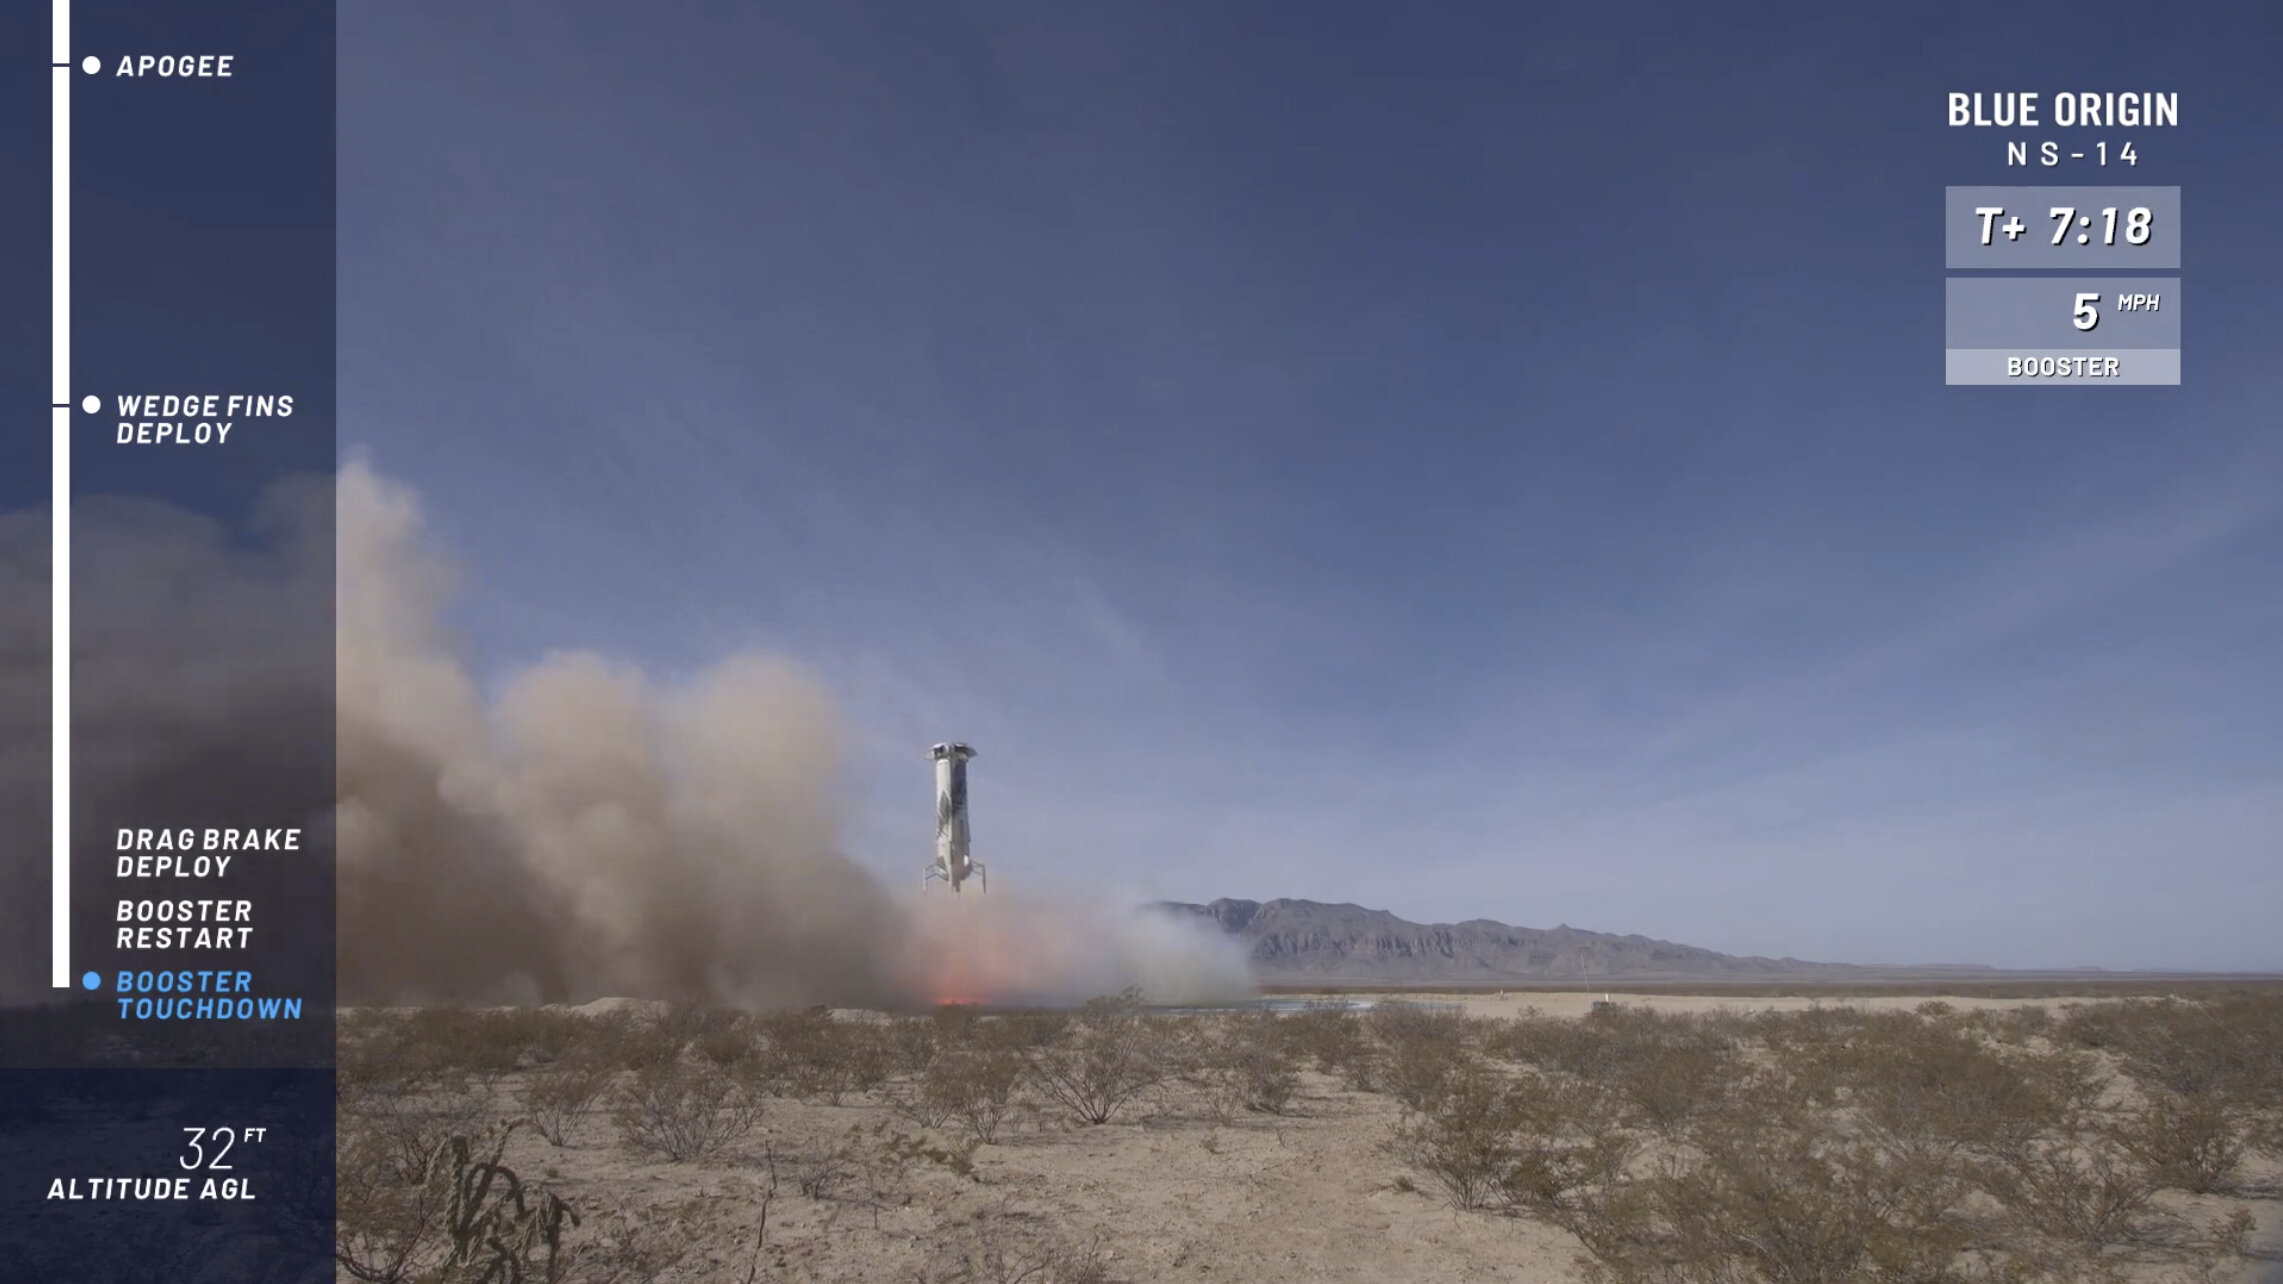 Blue Origin launches space capsule with space benefits